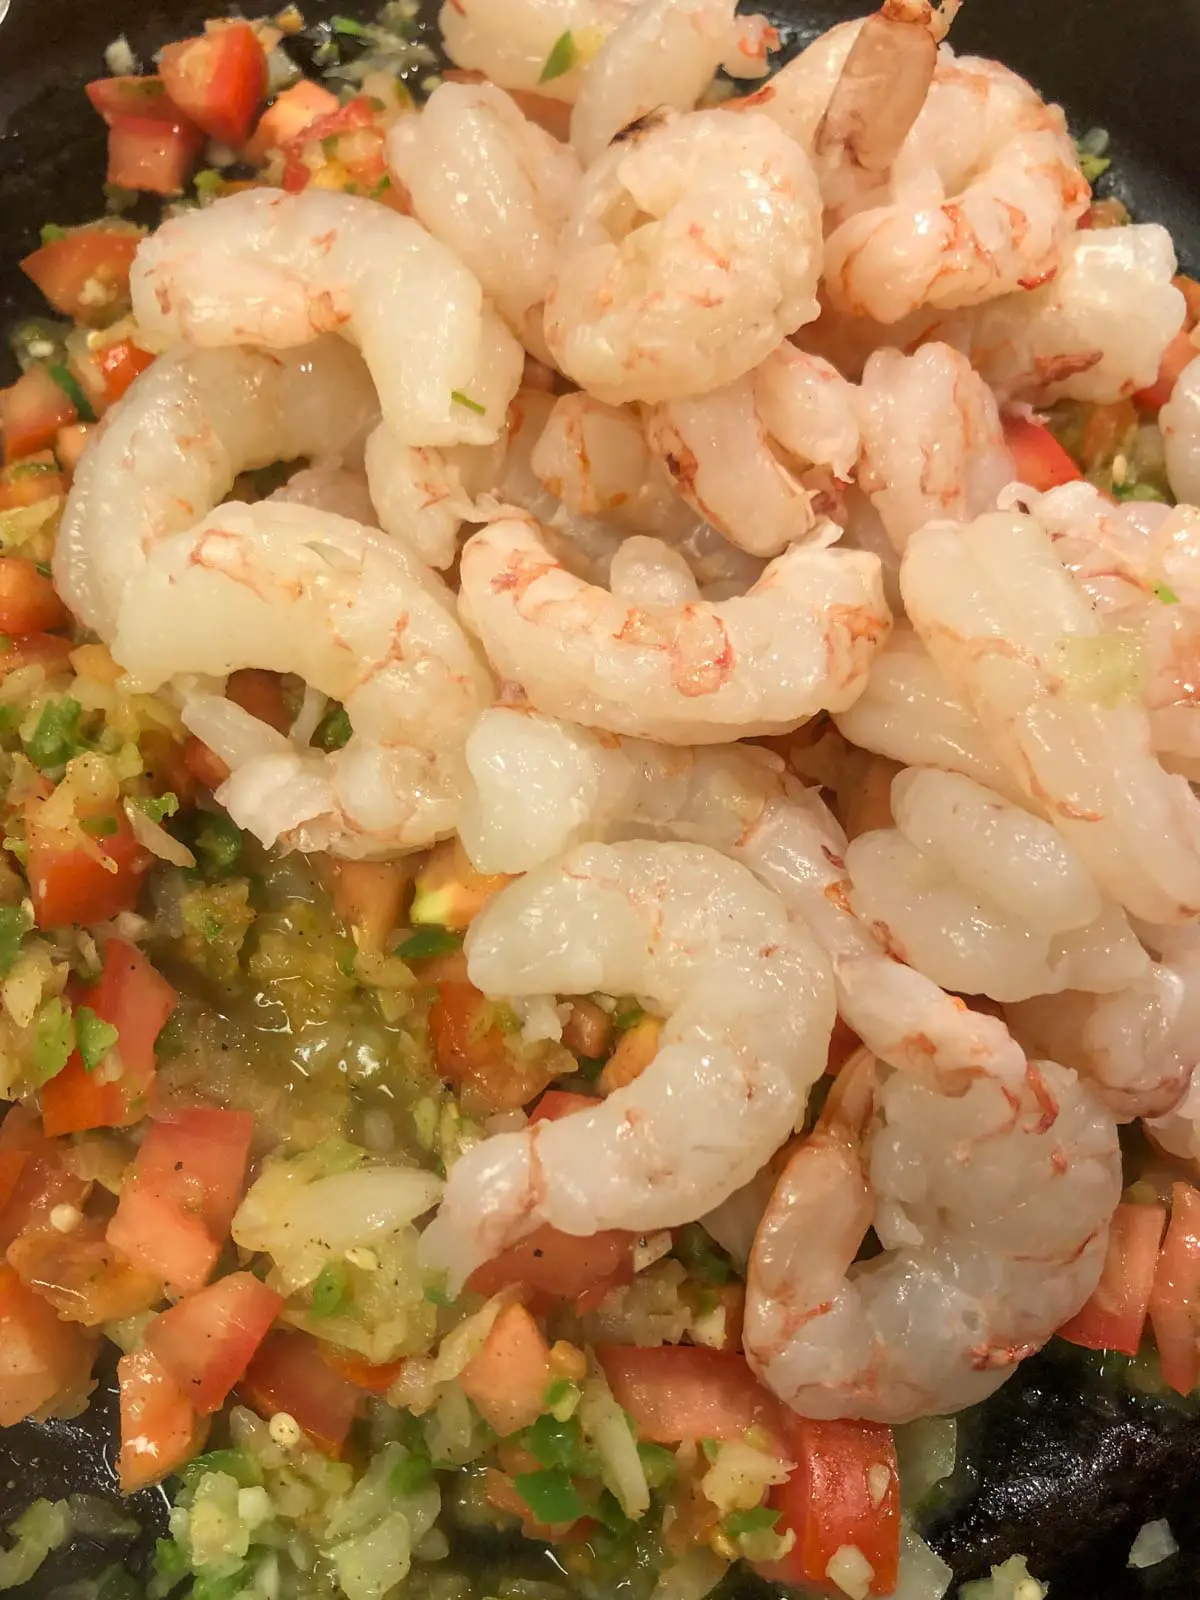 Shrimp, diced tomatoes, minced onion and chilies.